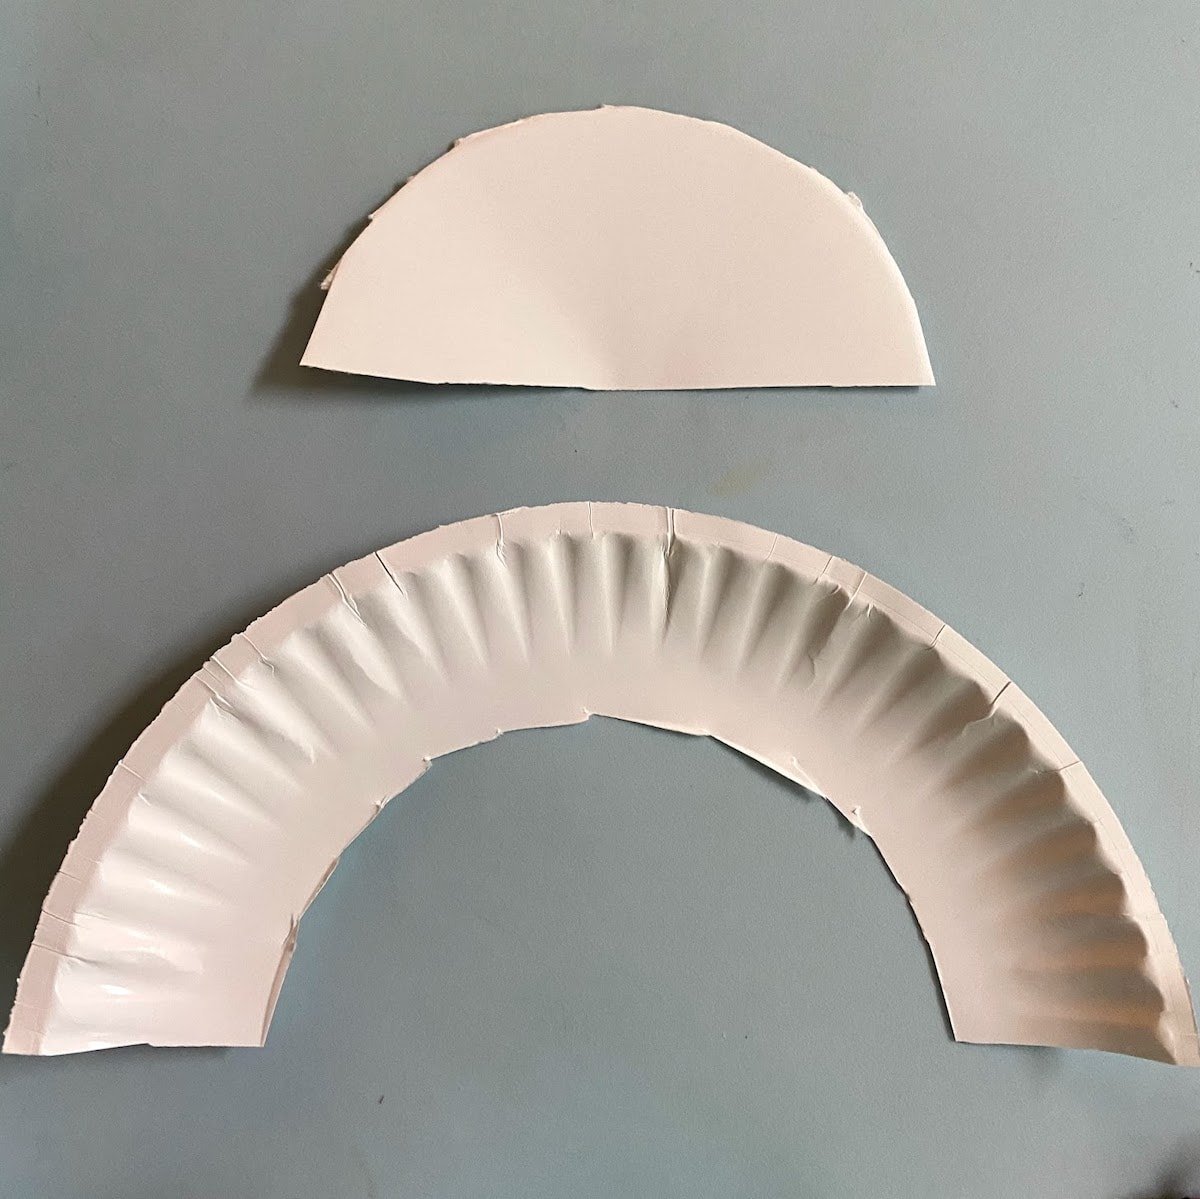 paper plate's edge cut out